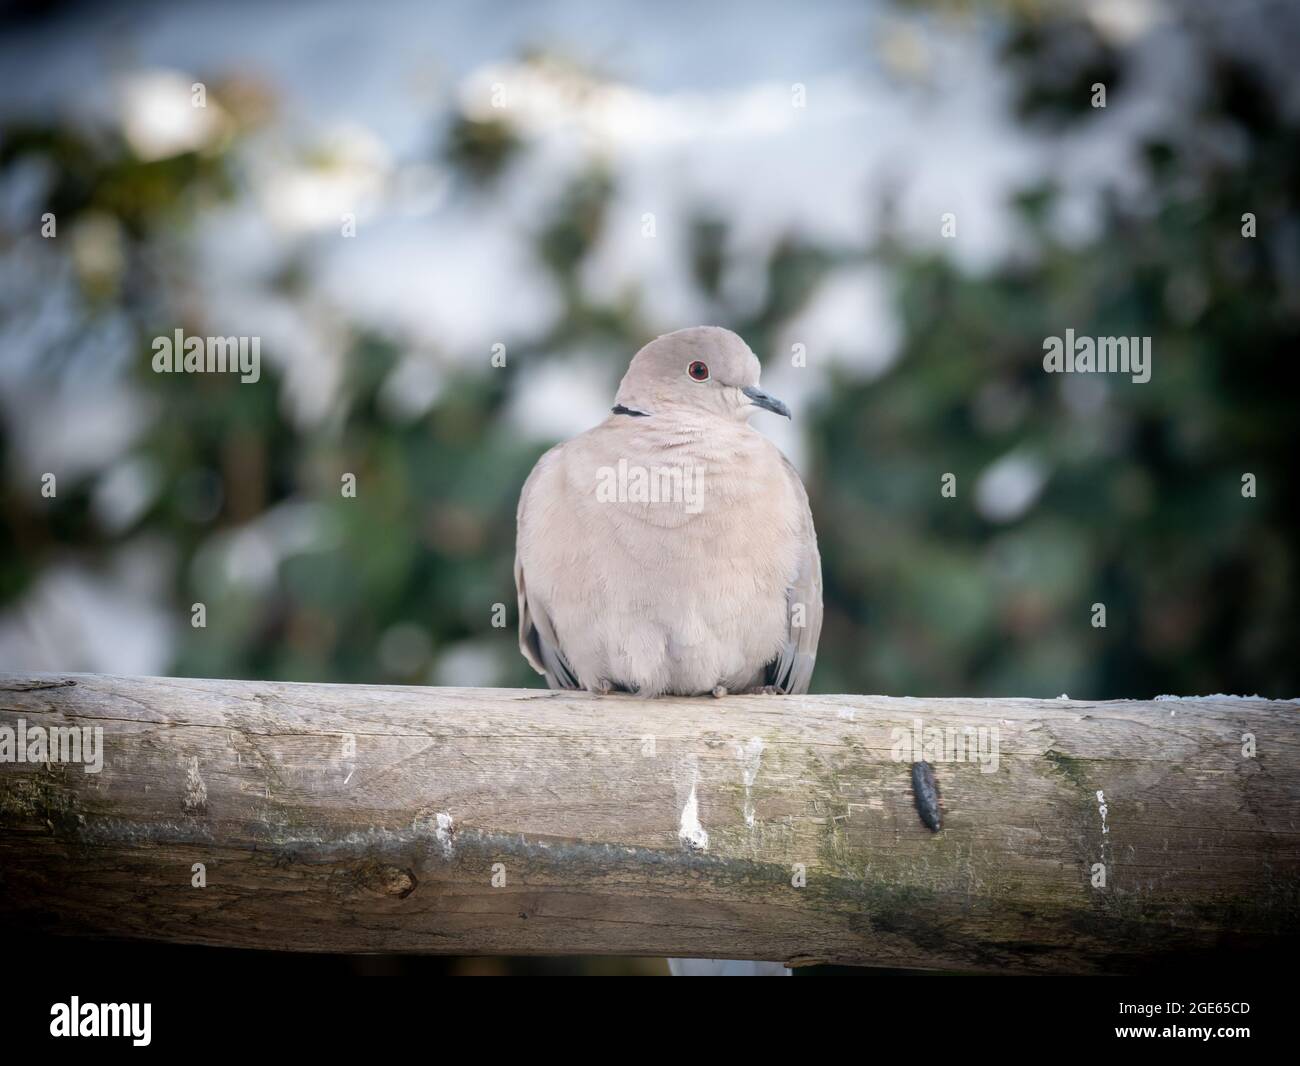 Collared dove, Streptopelia decaocto, perching on wooden fence, Netherlands Stock Photo